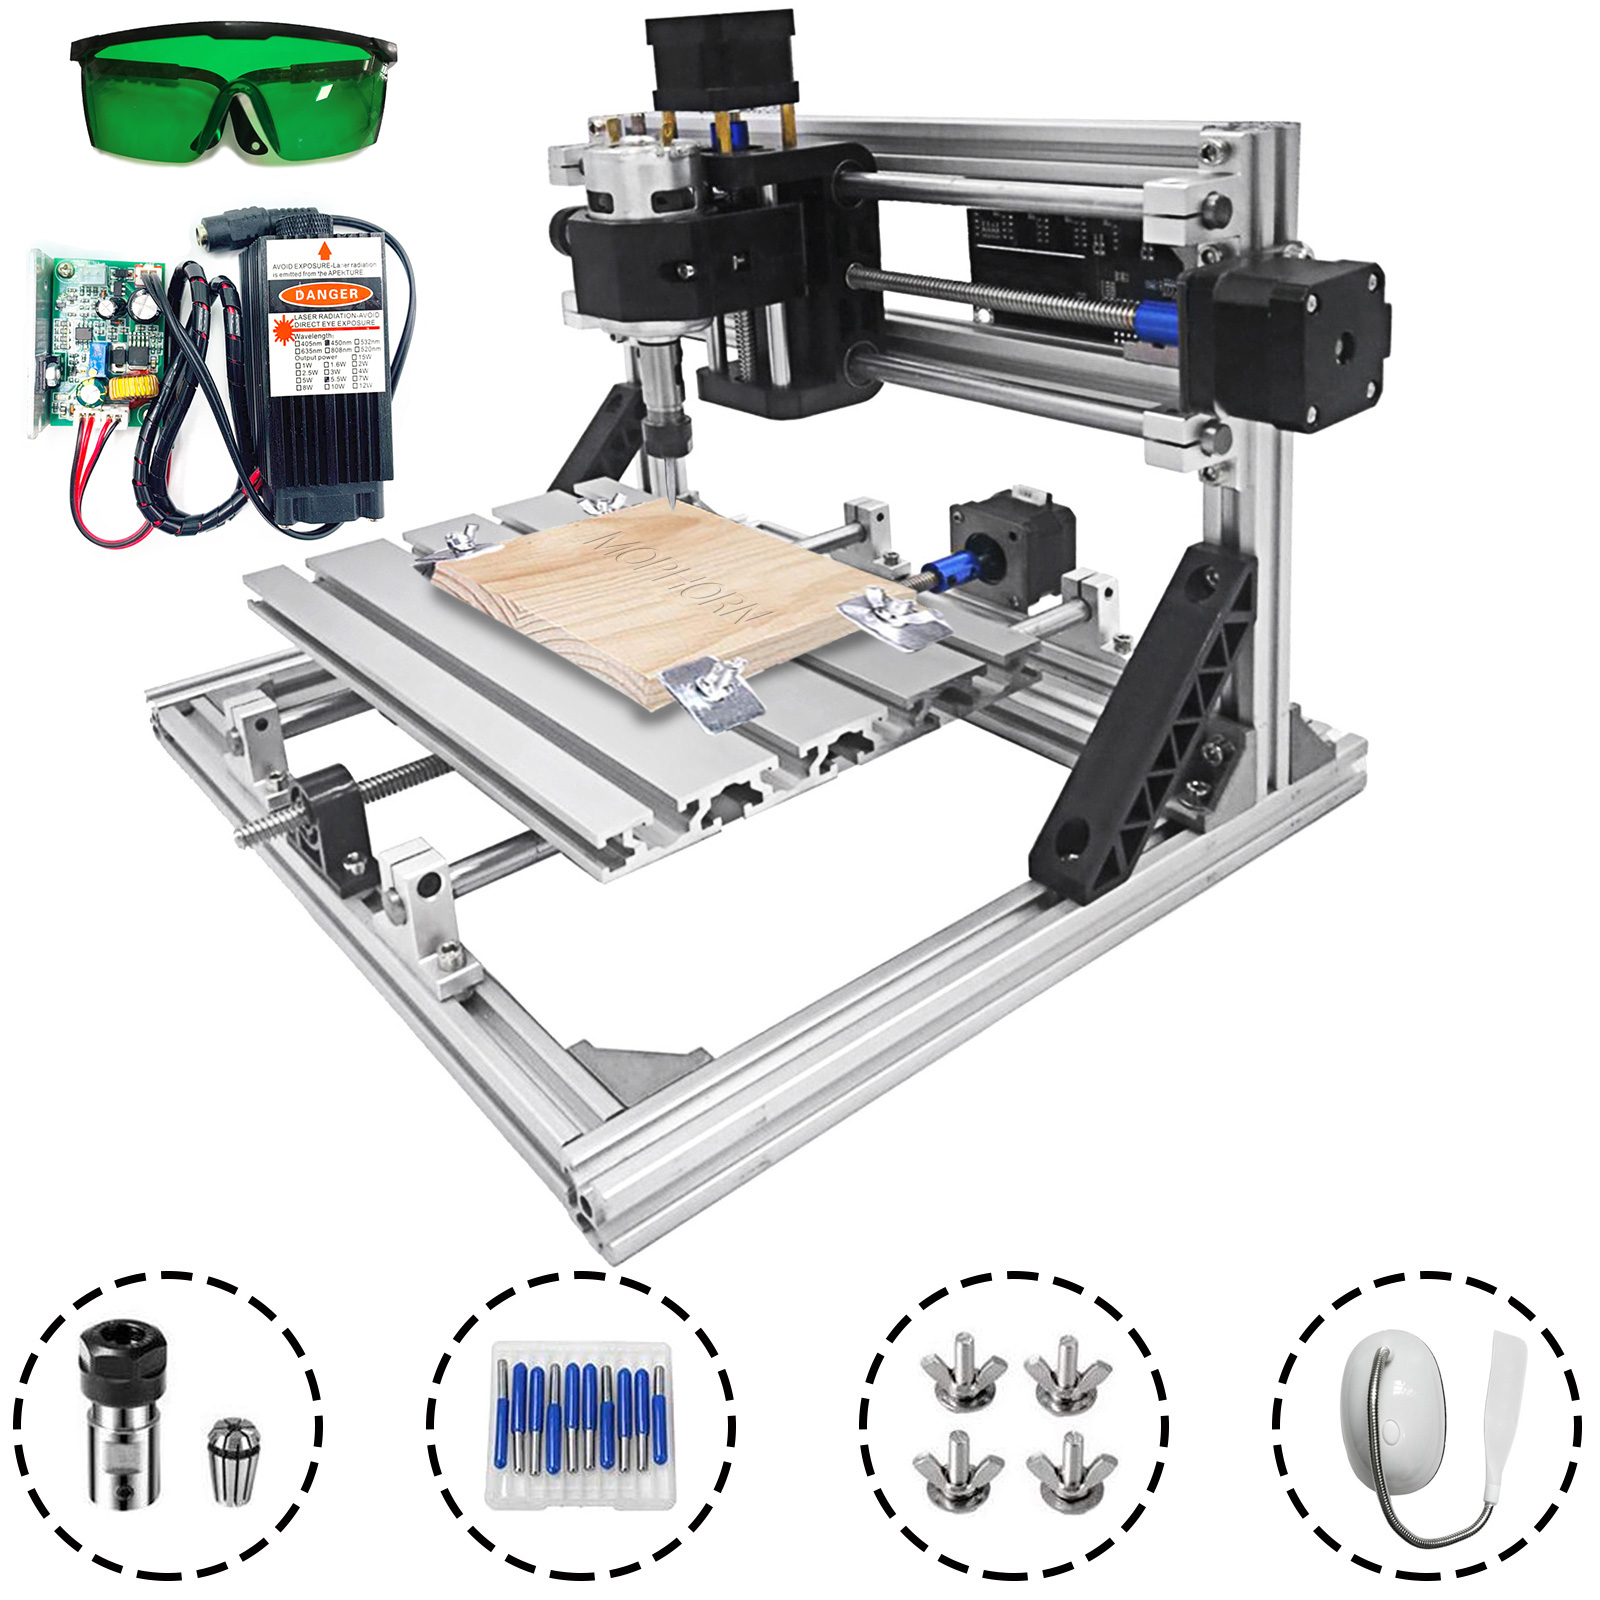 3 Axis CNC Engraver 2418 With Offline Controller Wood Plastic PVC Engraving 